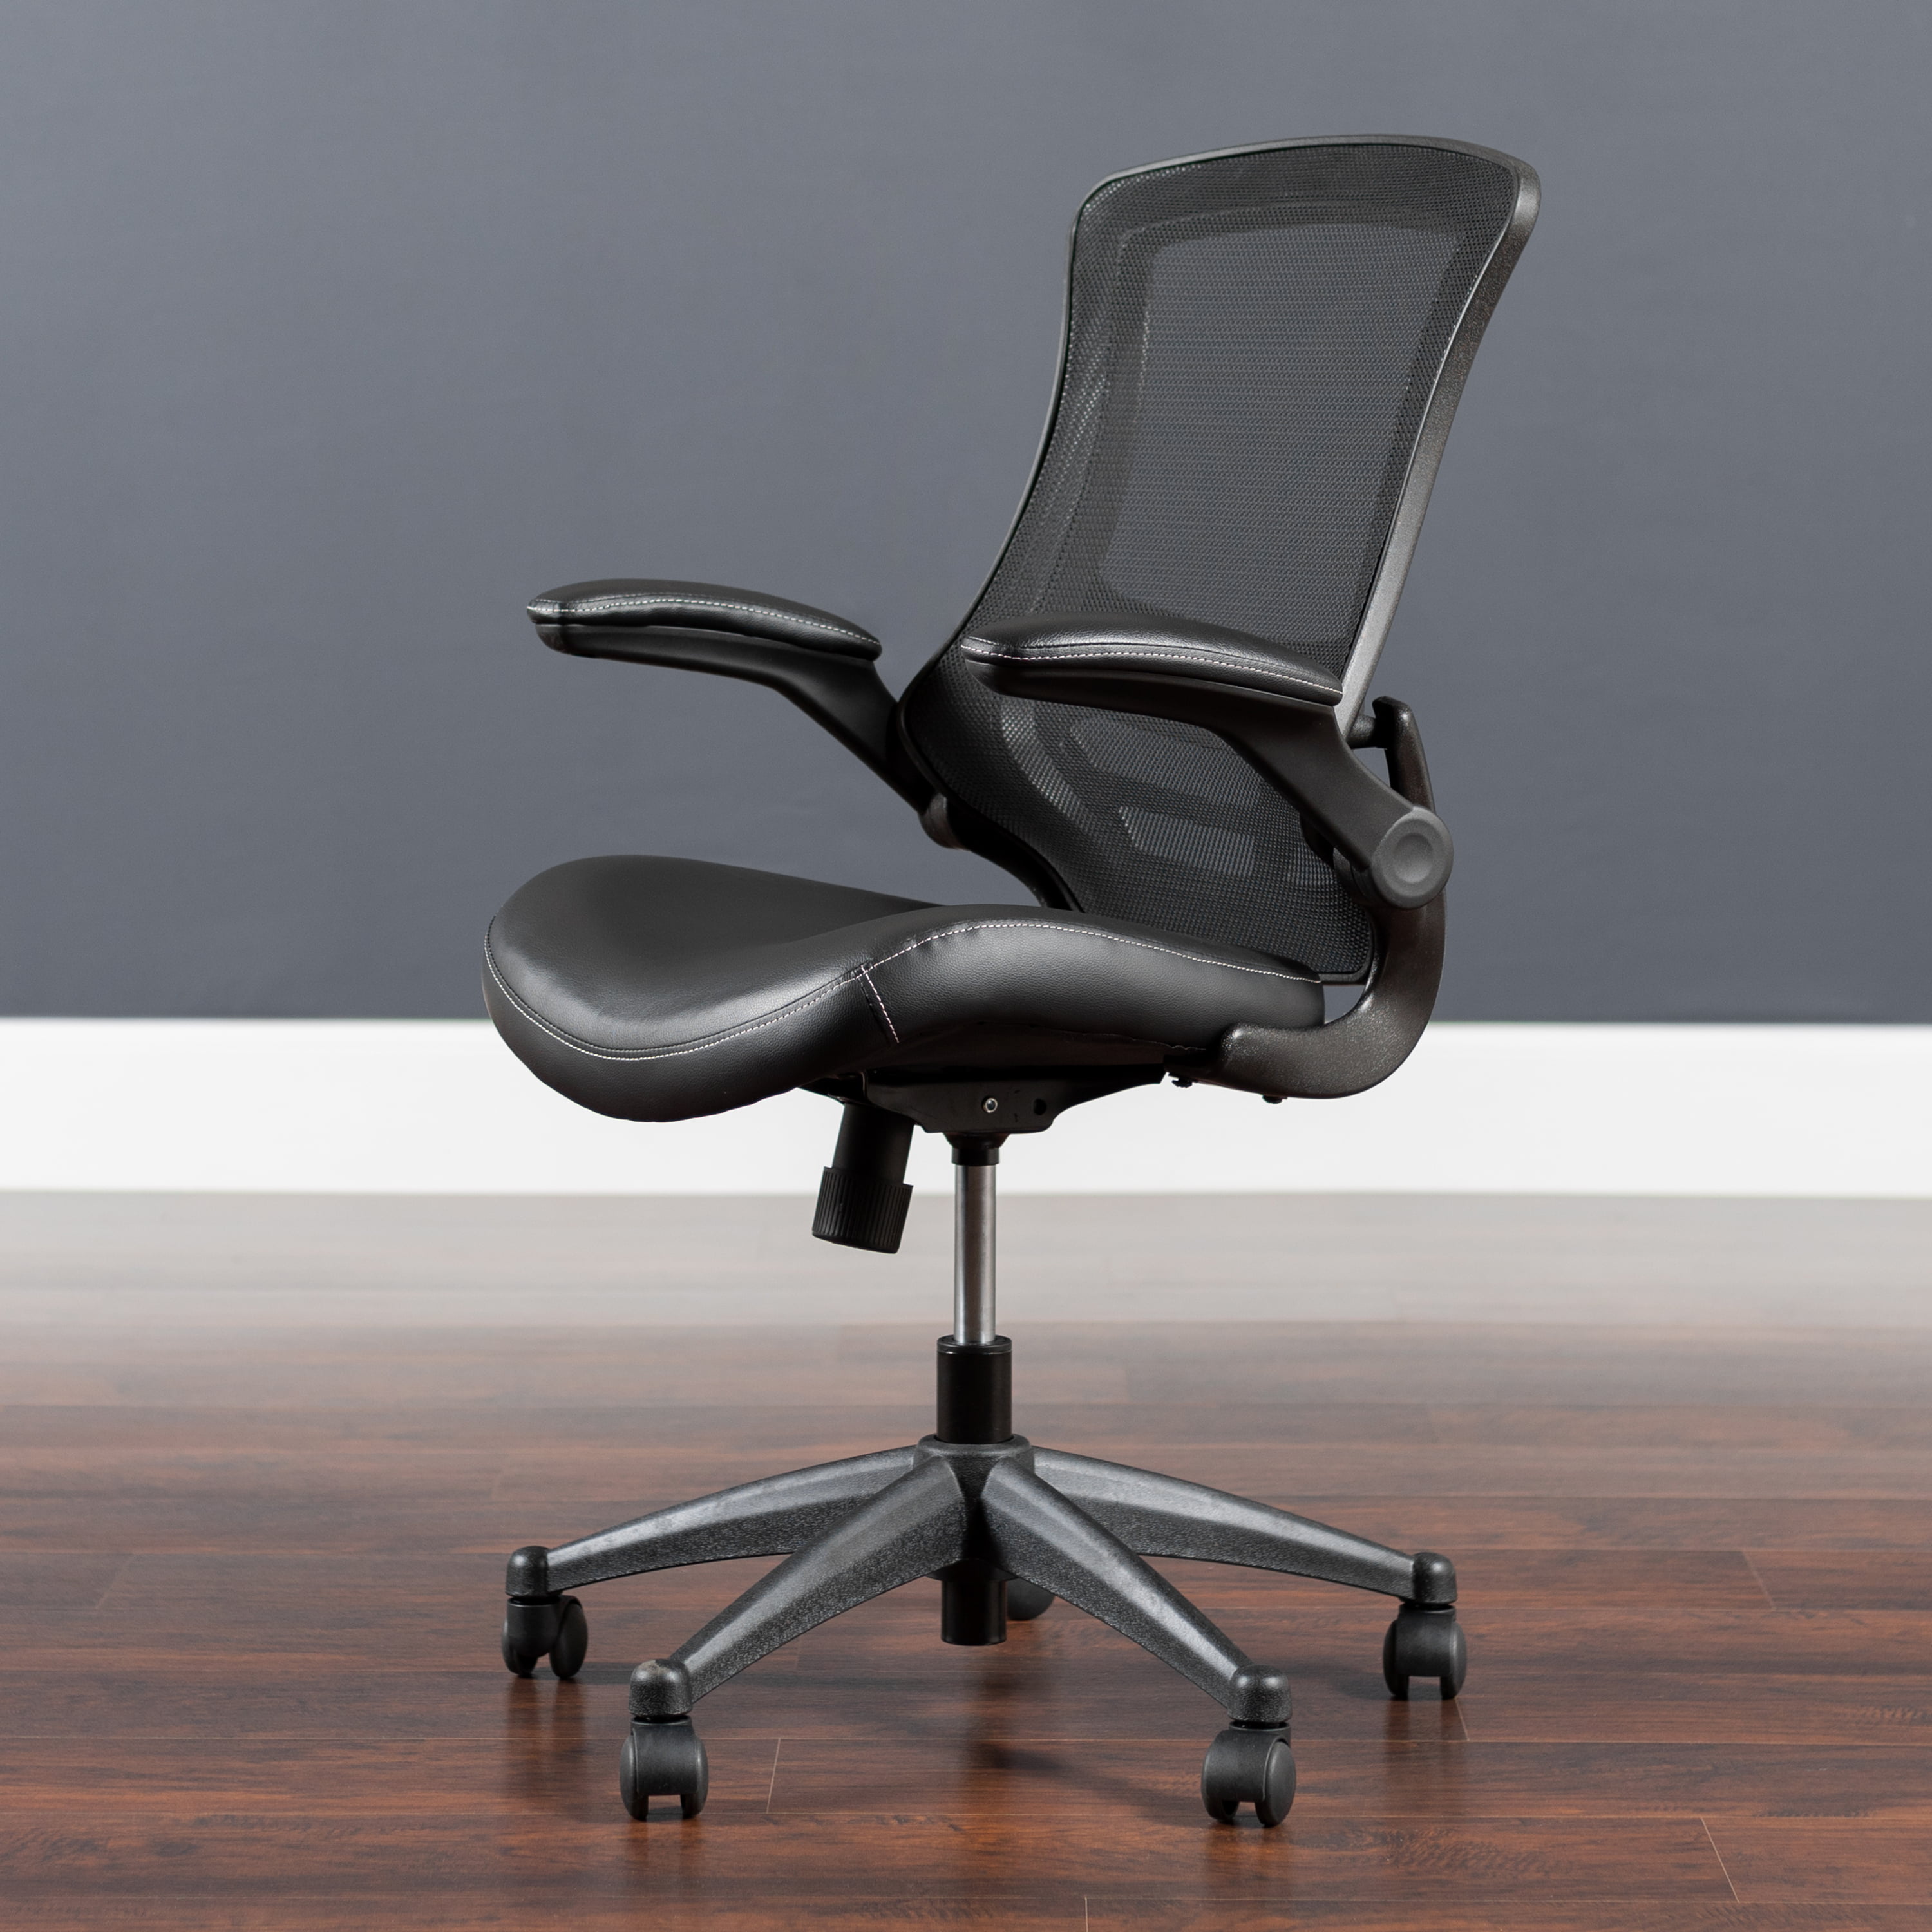 Featured image of post Fold Up Desk Chair : Check out our desk chair selection for the very best in unique or custom, handmade pieces from our desk chairs shops.